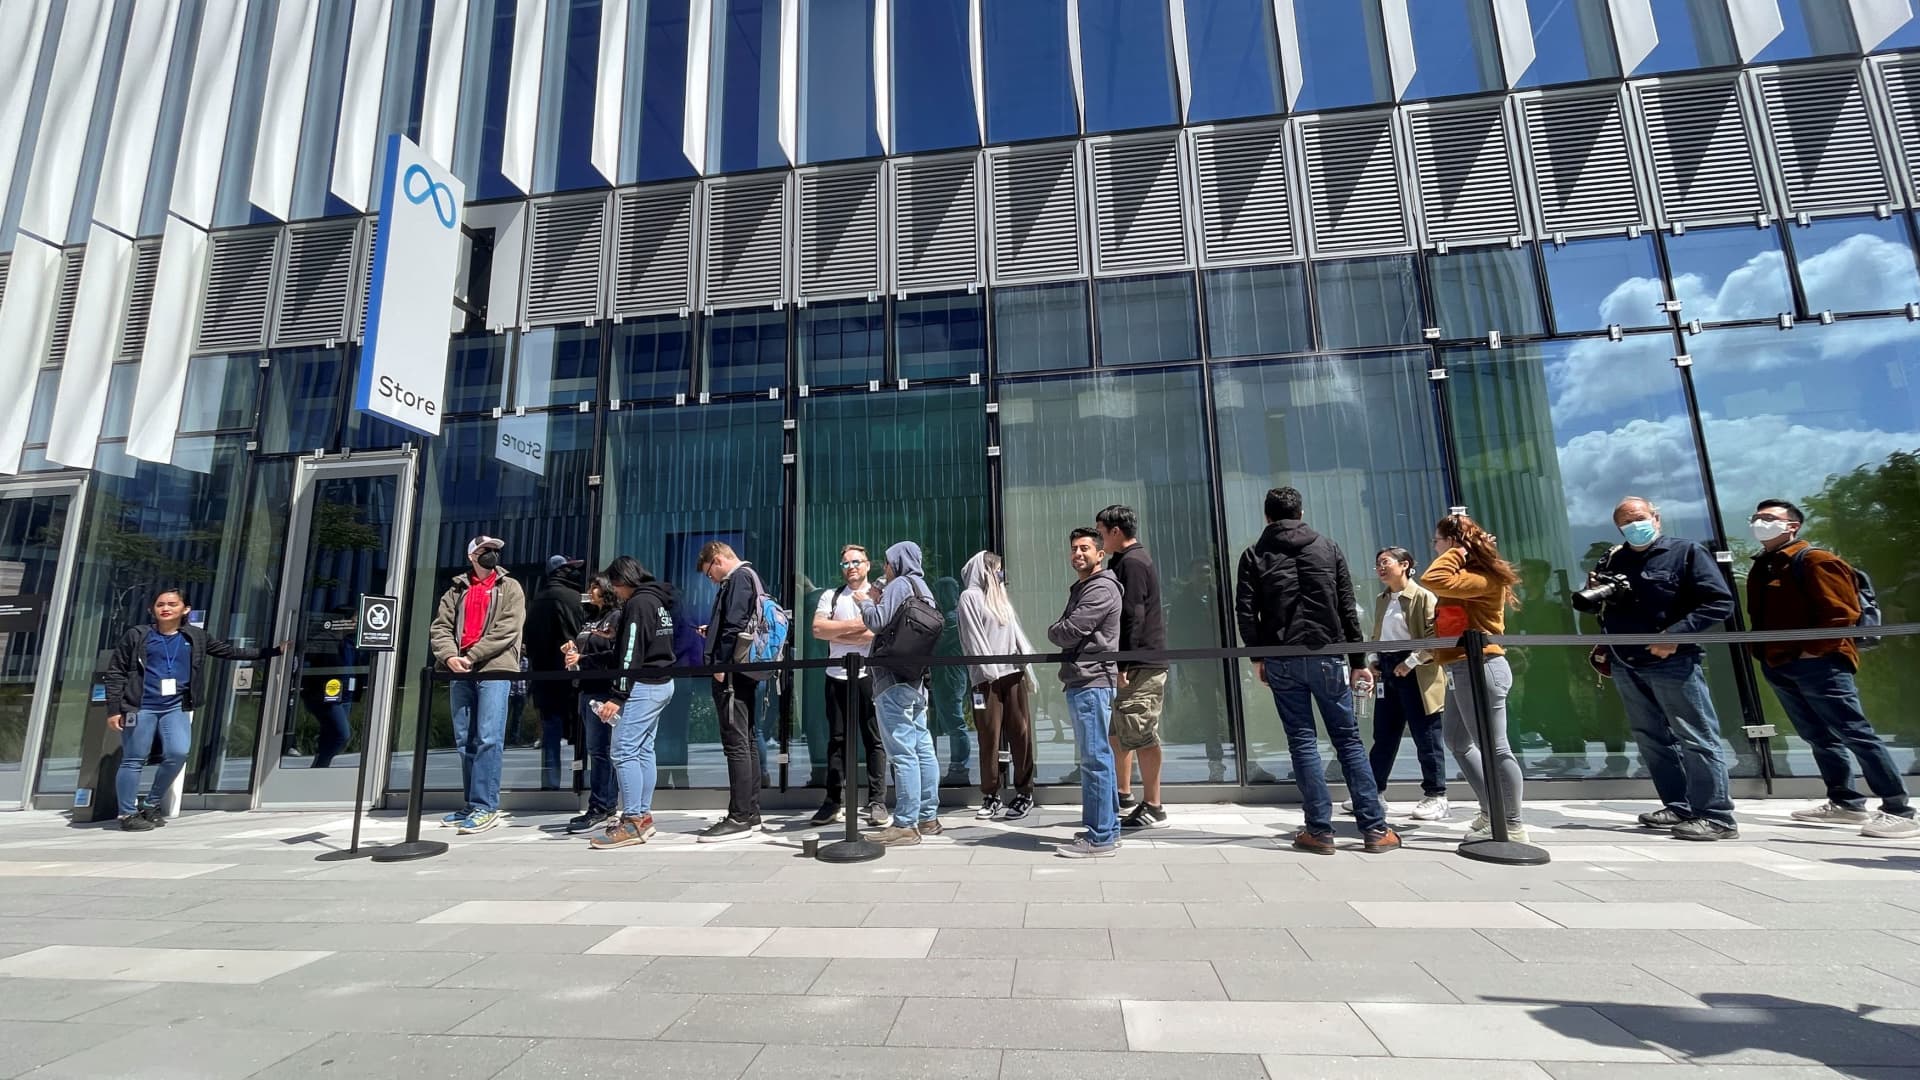 Customers wait in line outside the new Meta retail store on its opening day in Burlingame, California, May 9, 2022.